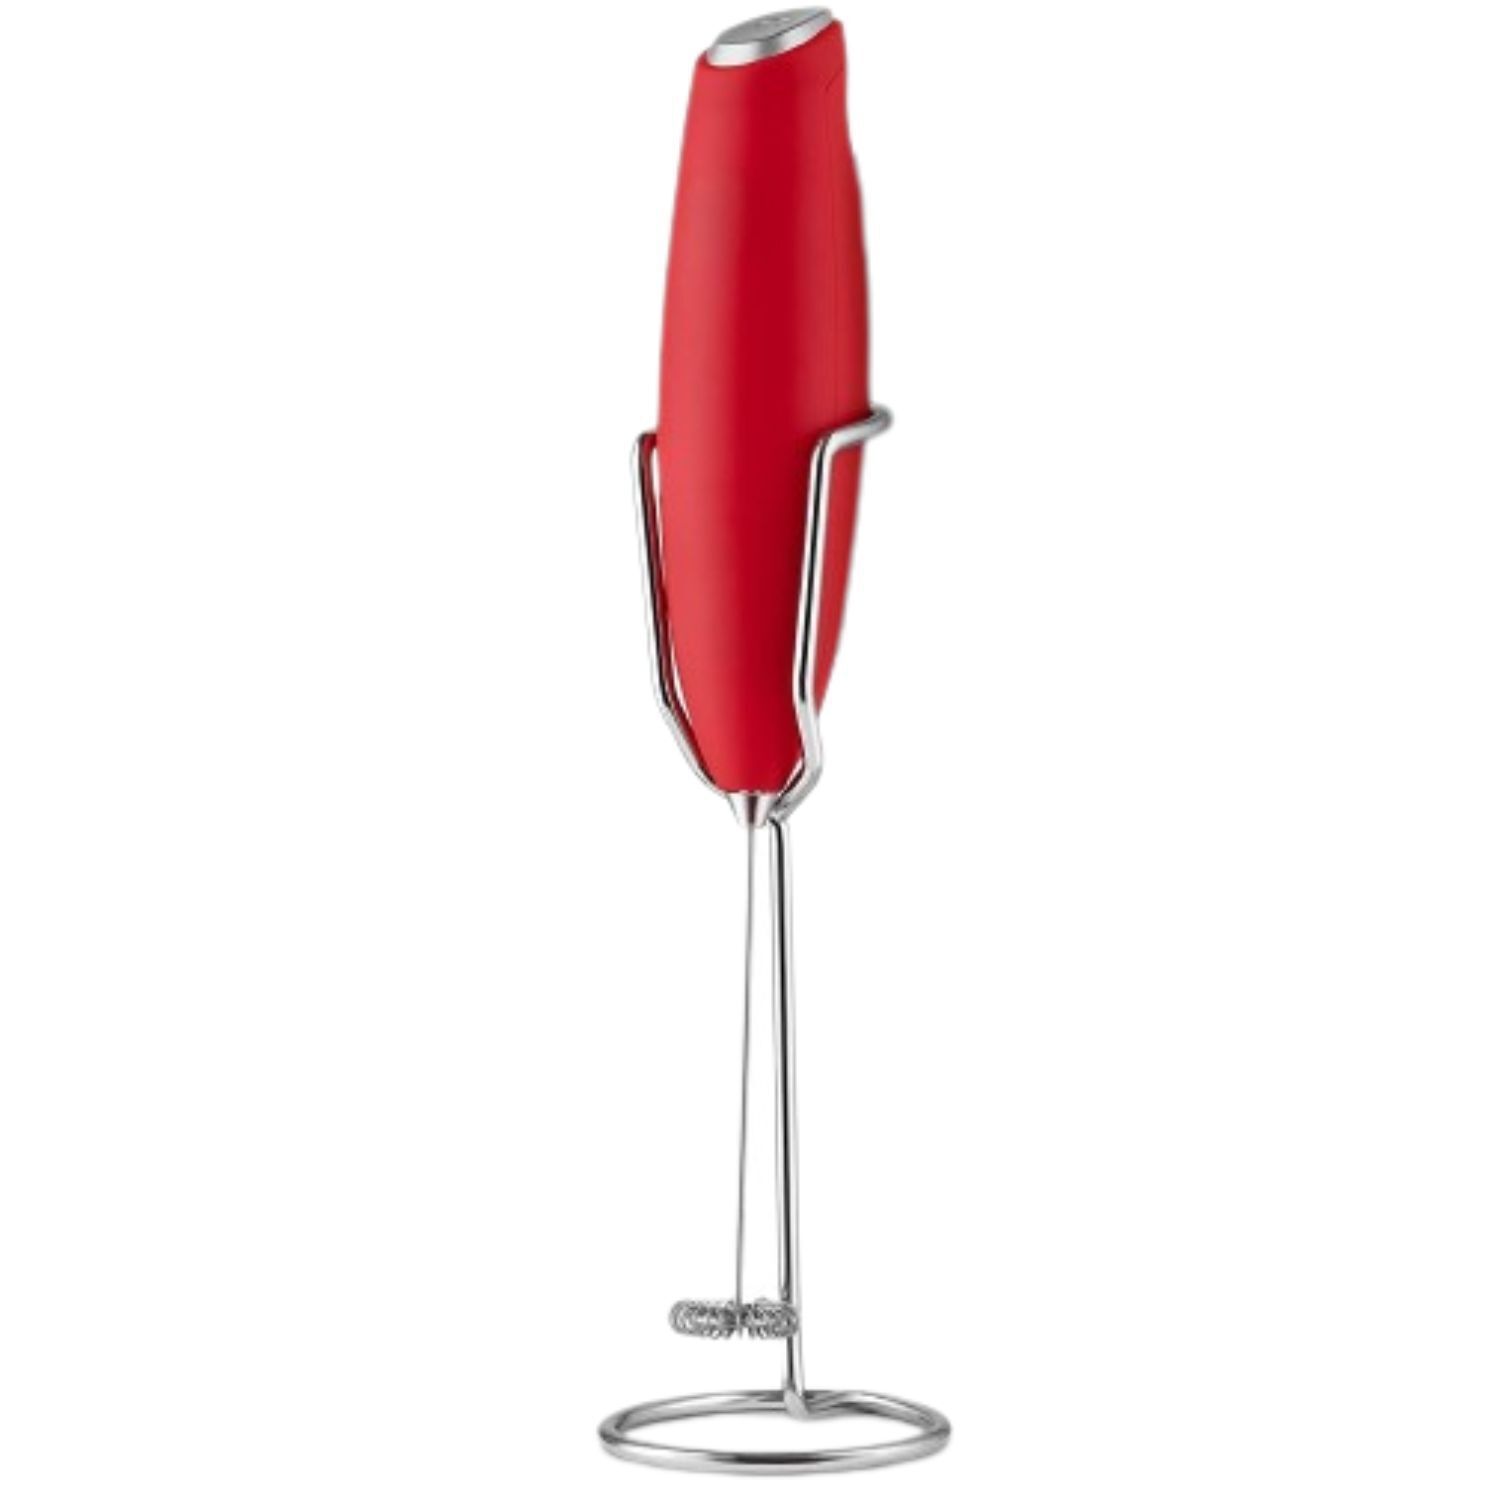 Primula Handheld Battery Operated Milk Frother - Red, 1 ct - King